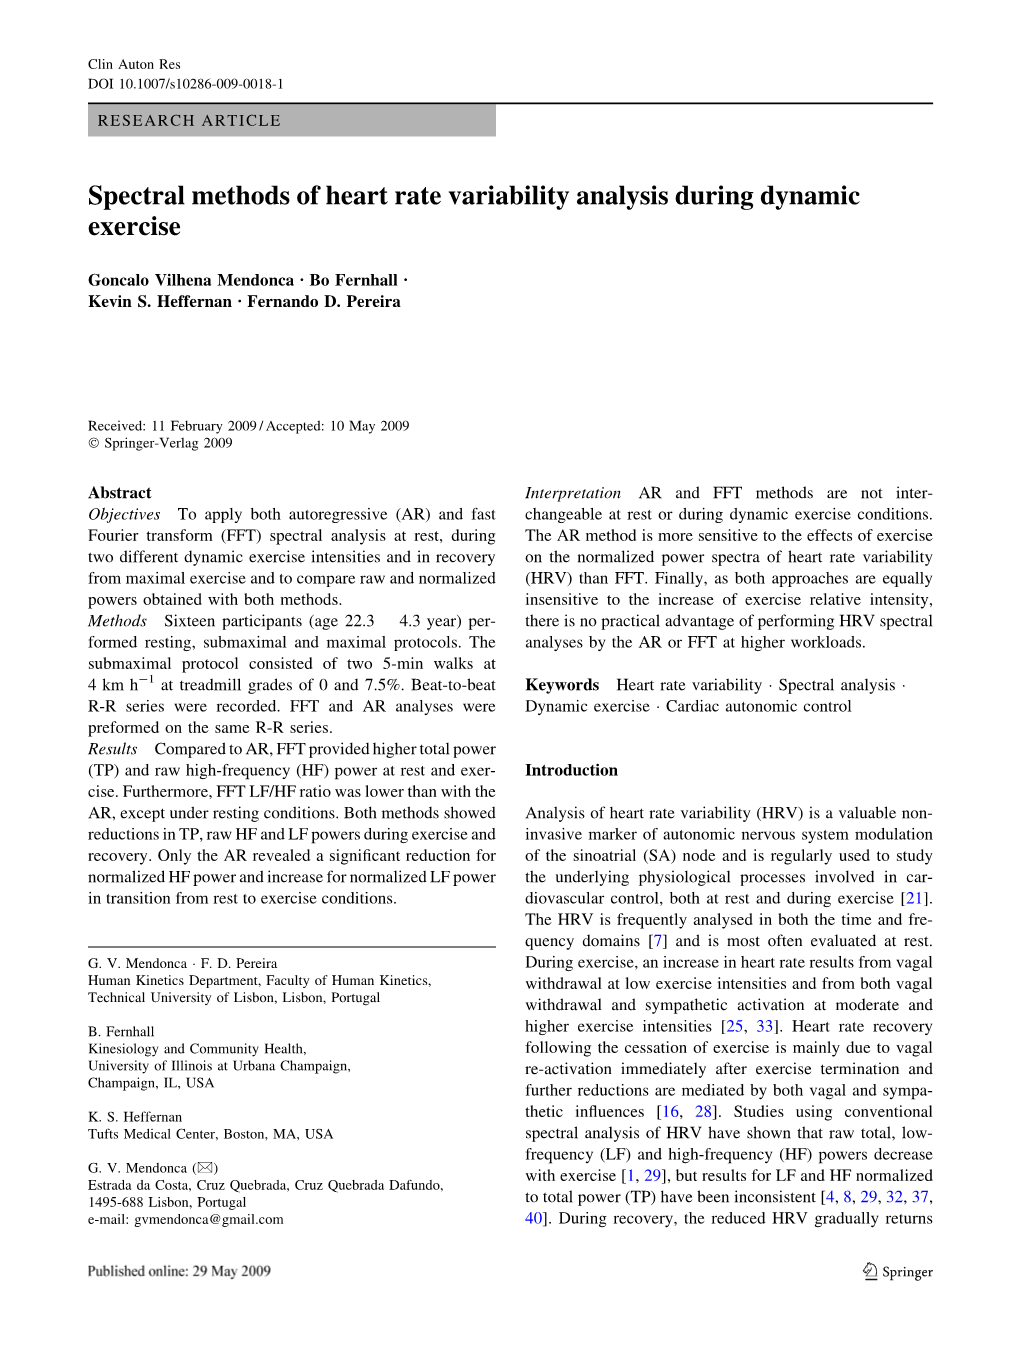 Spectral Methods of Heart Rate Variability Analysis During Dynamic Exercise